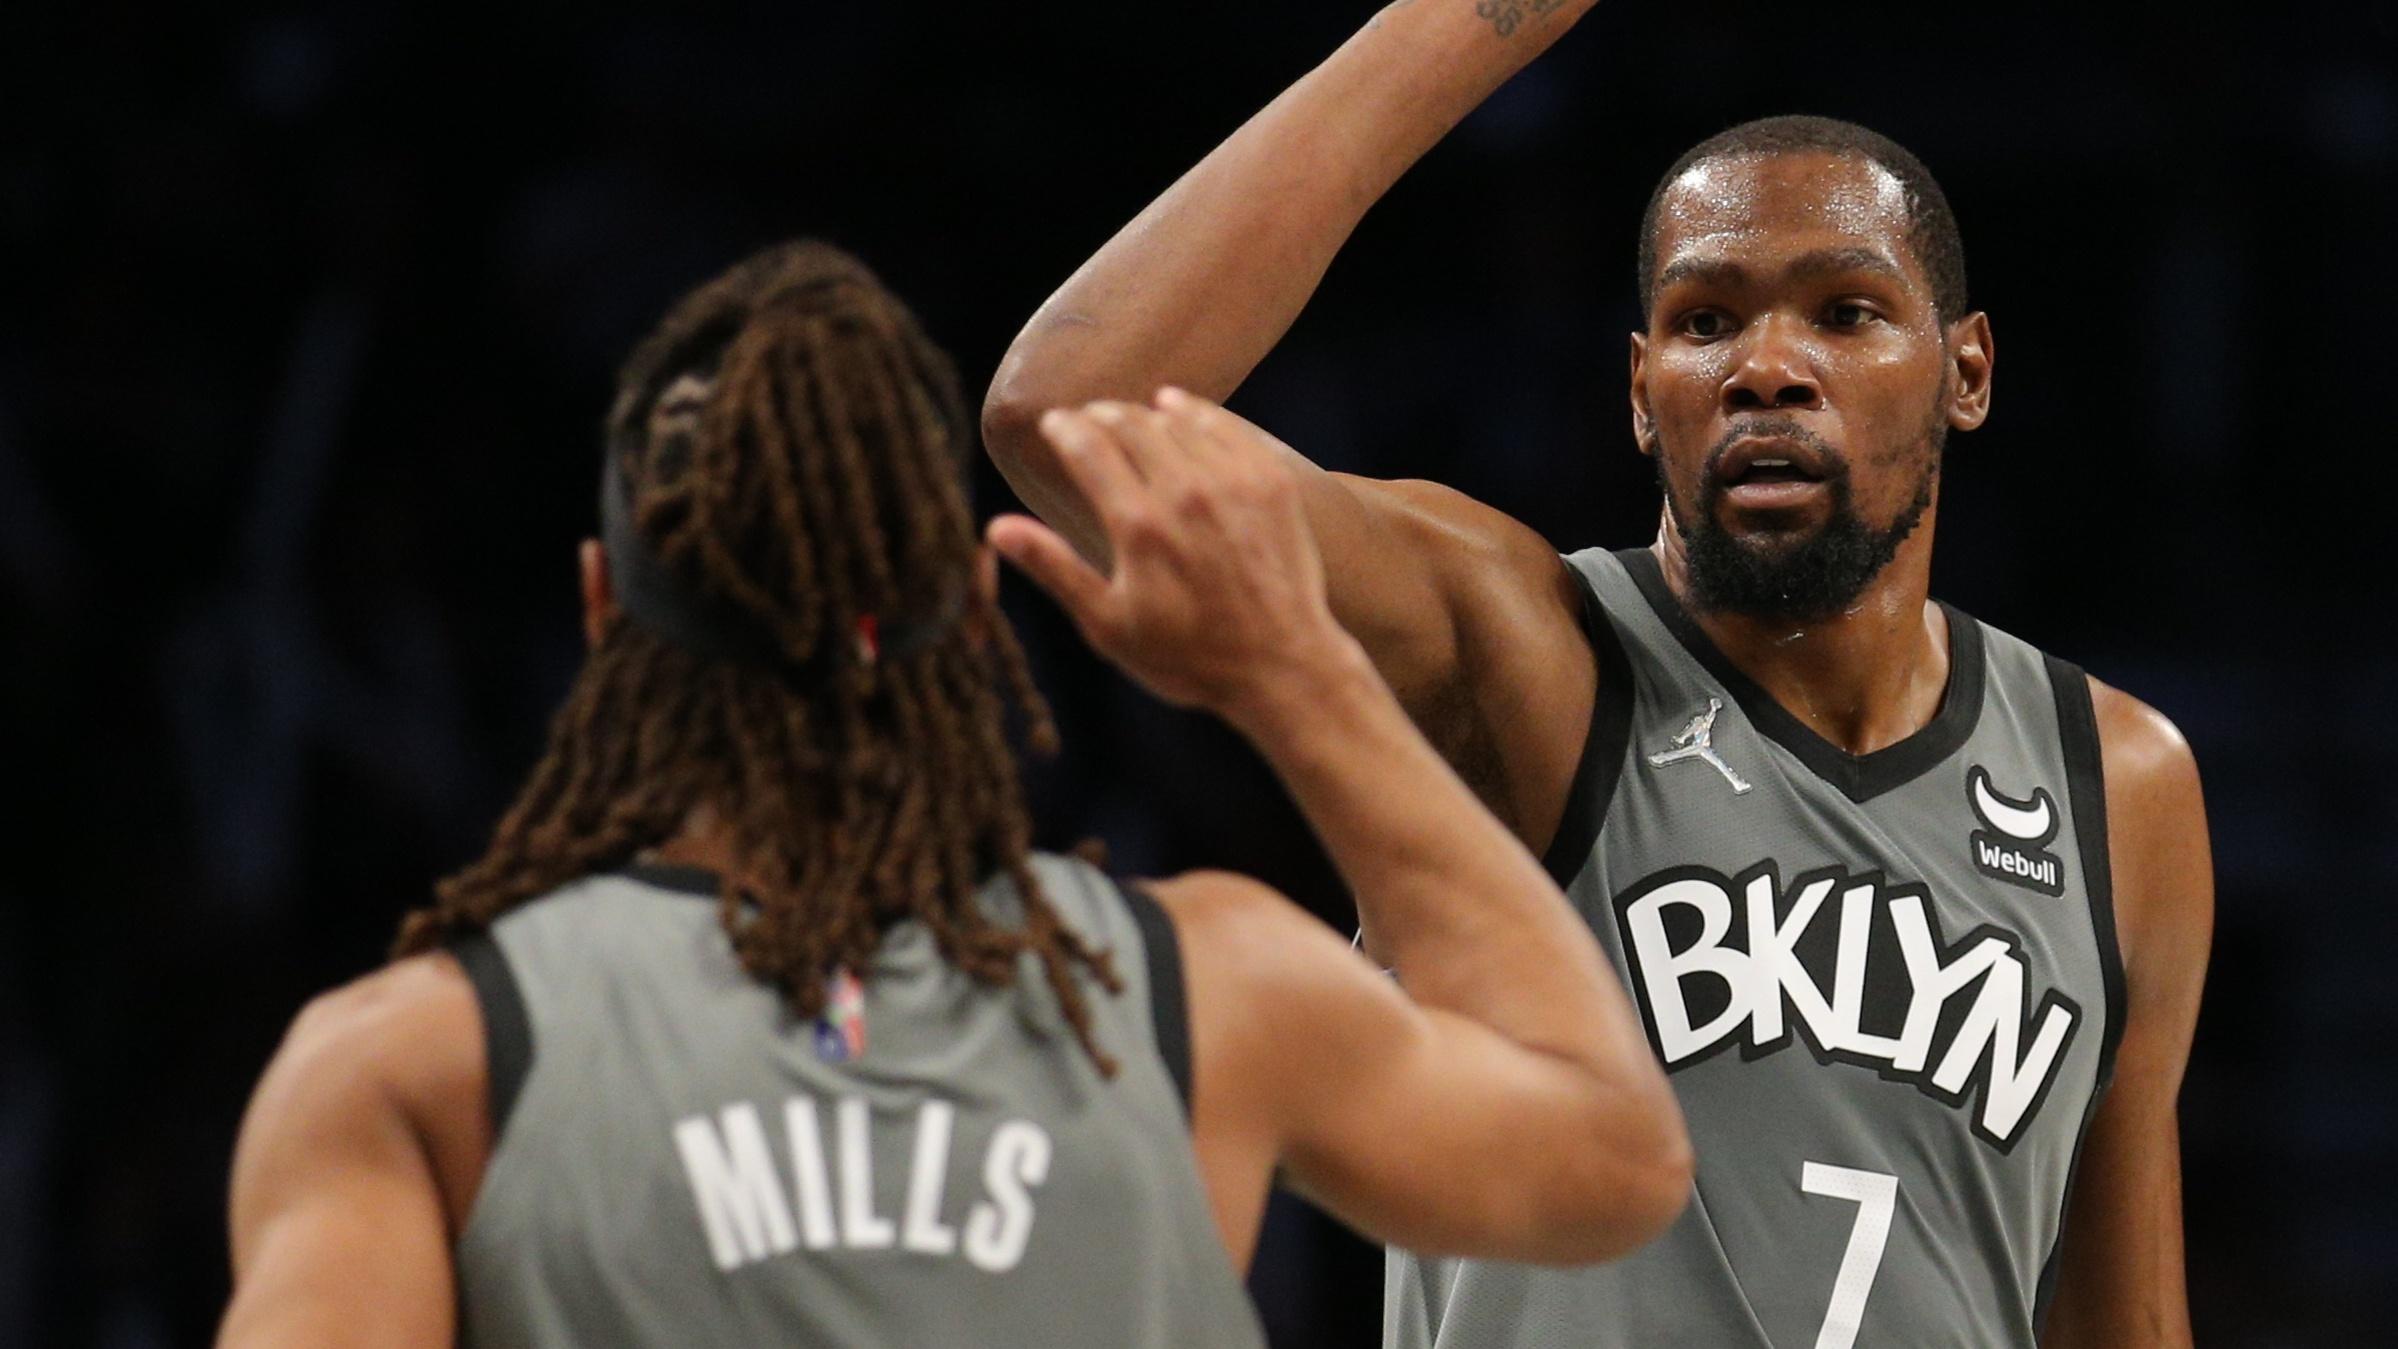 Oct 25, 2021; Brooklyn, New York, USA; Brooklyn Nets guard Patty Mills (8) high fives forward Kevin Durant (7) after a three point shot during the third quarter at Barclays Center. Mandatory Credit: Brad Penner-USA TODAY Sports / © Brad Penner-USA TODAY Sports